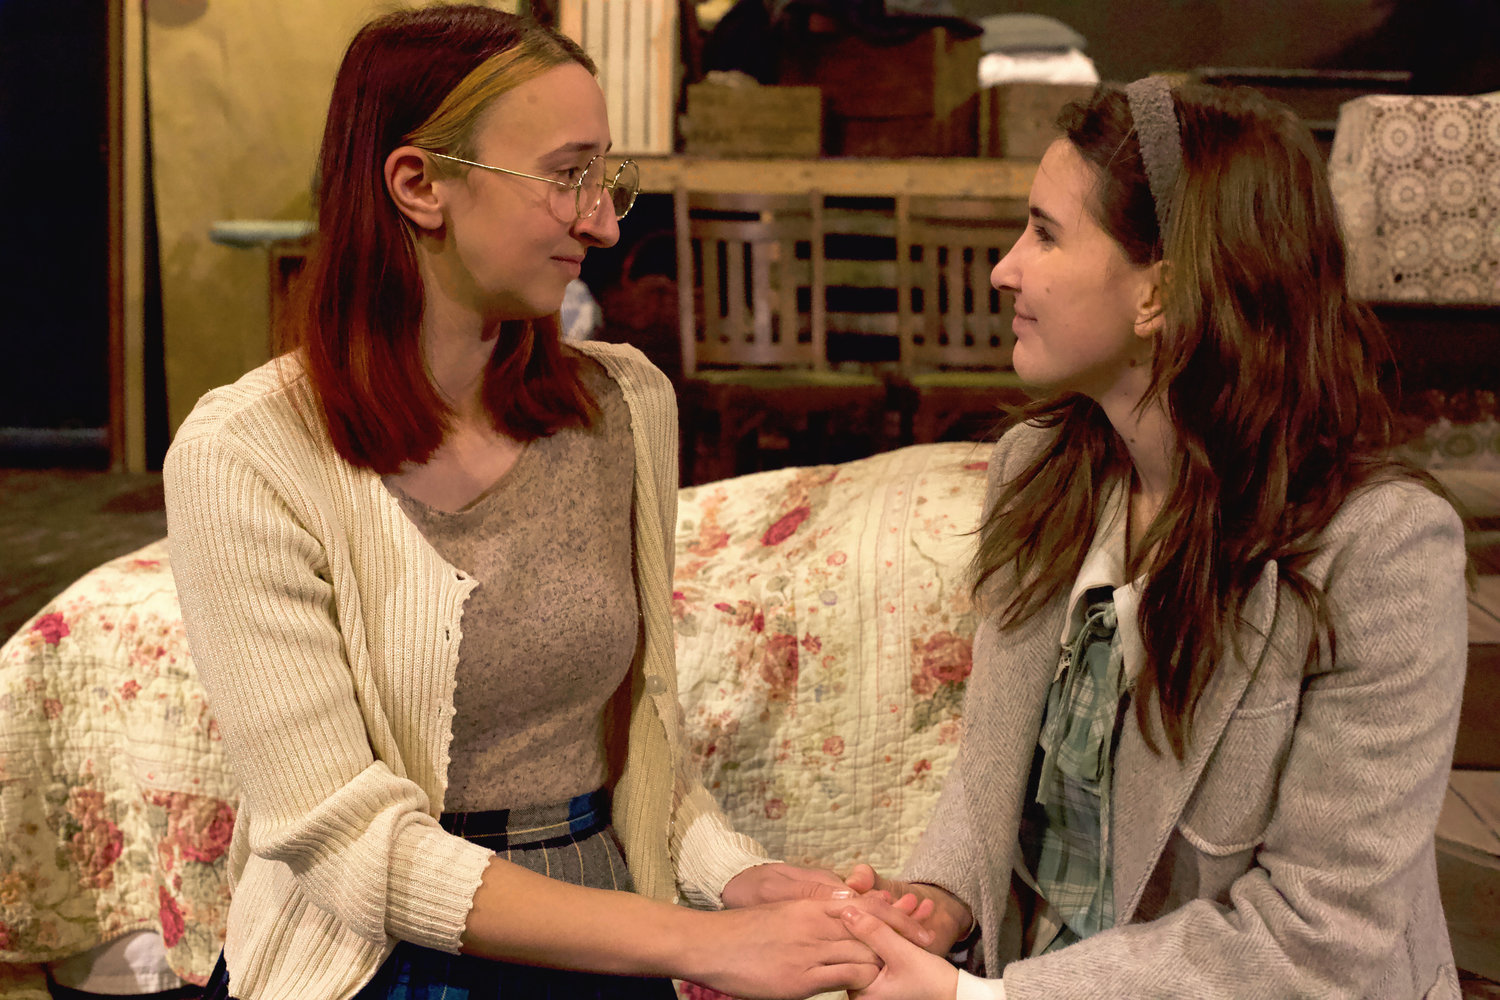 Lizzie Conner as Margot Frank, left, and Ruby Stanton as Anne Frank perform during a rehearsal of “The Diary of Anne Frank” at the Evergreen Playhouse in Centralia on Wednesday.